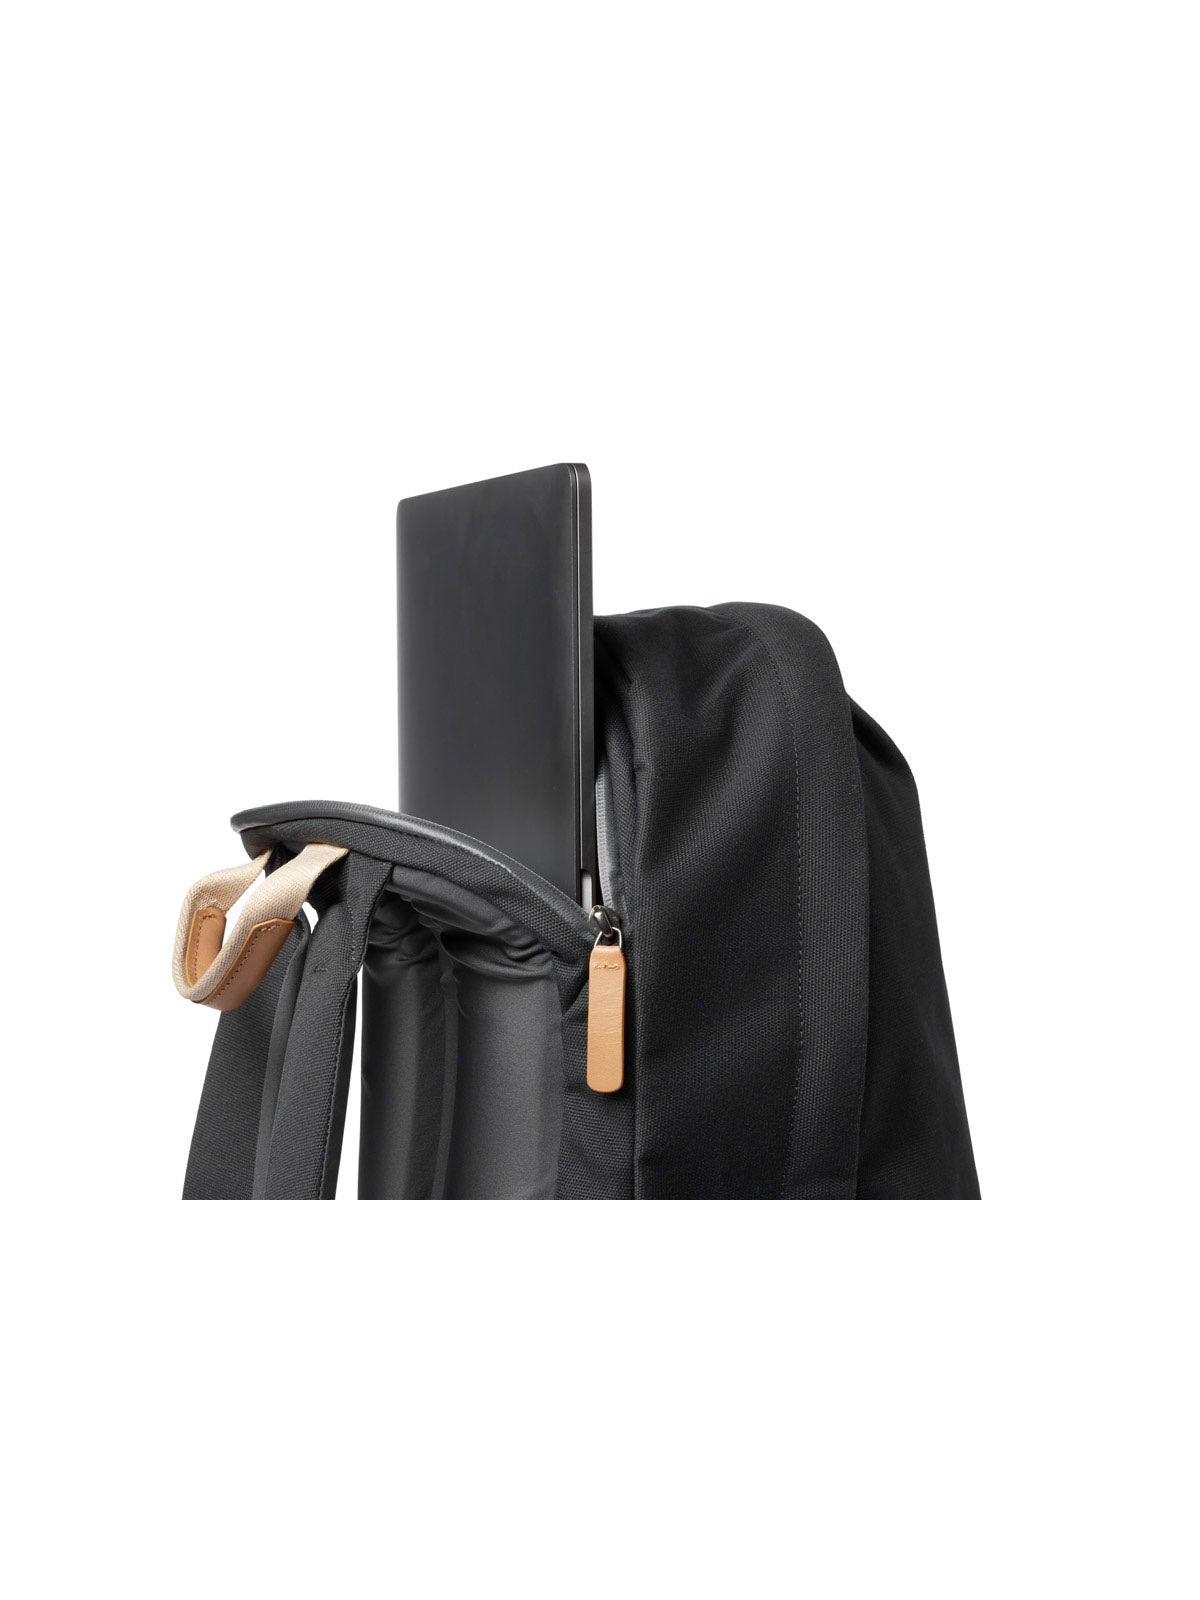 Bellroy Classic Backpack Plus Second Edition Charcoal